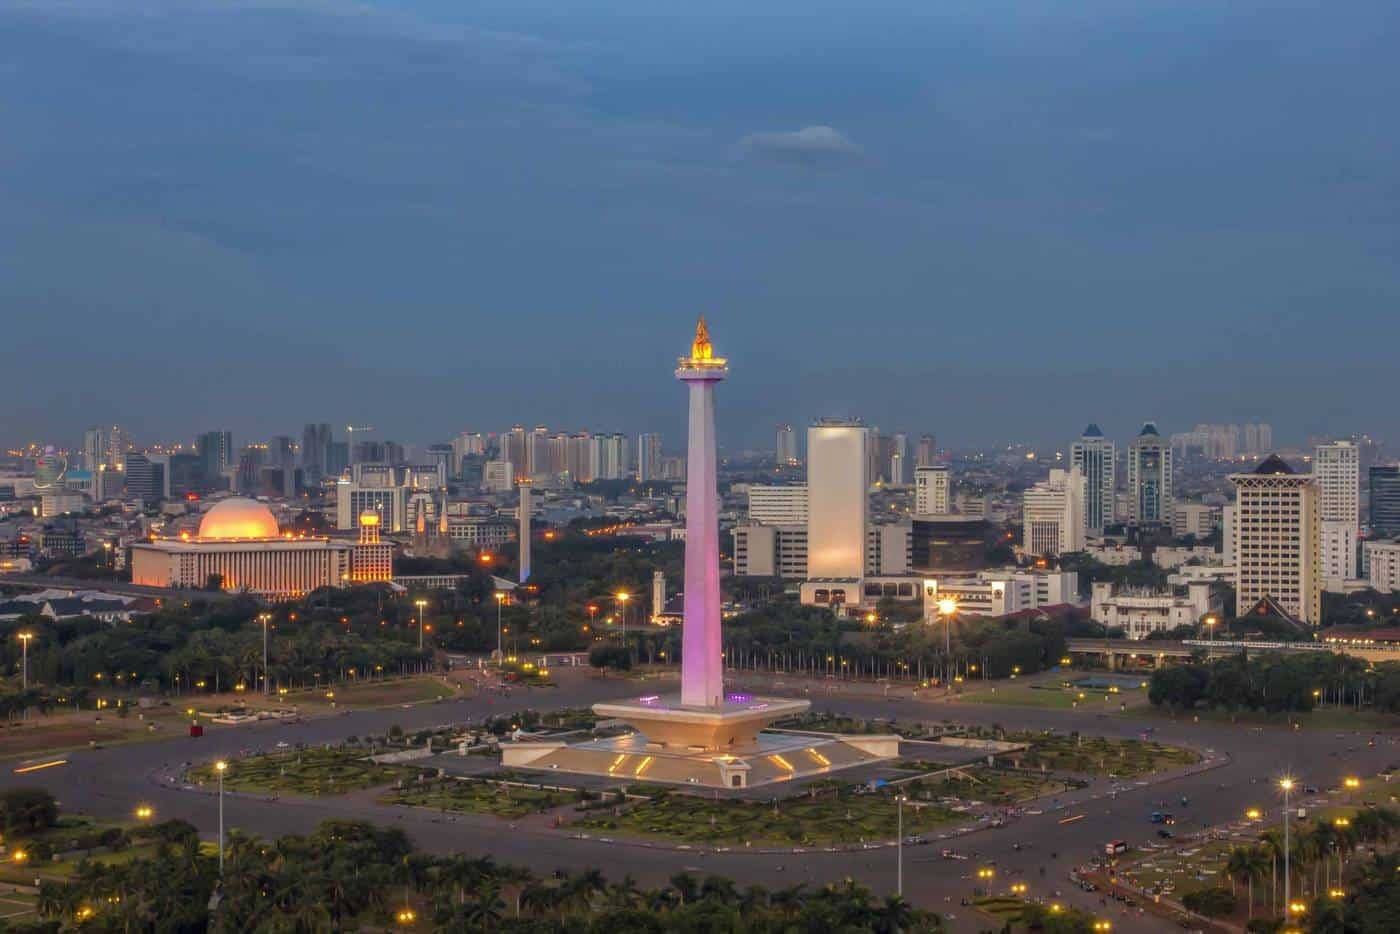 10 REASONS TO VISIT JAKARTA - Travel magazine for a curious